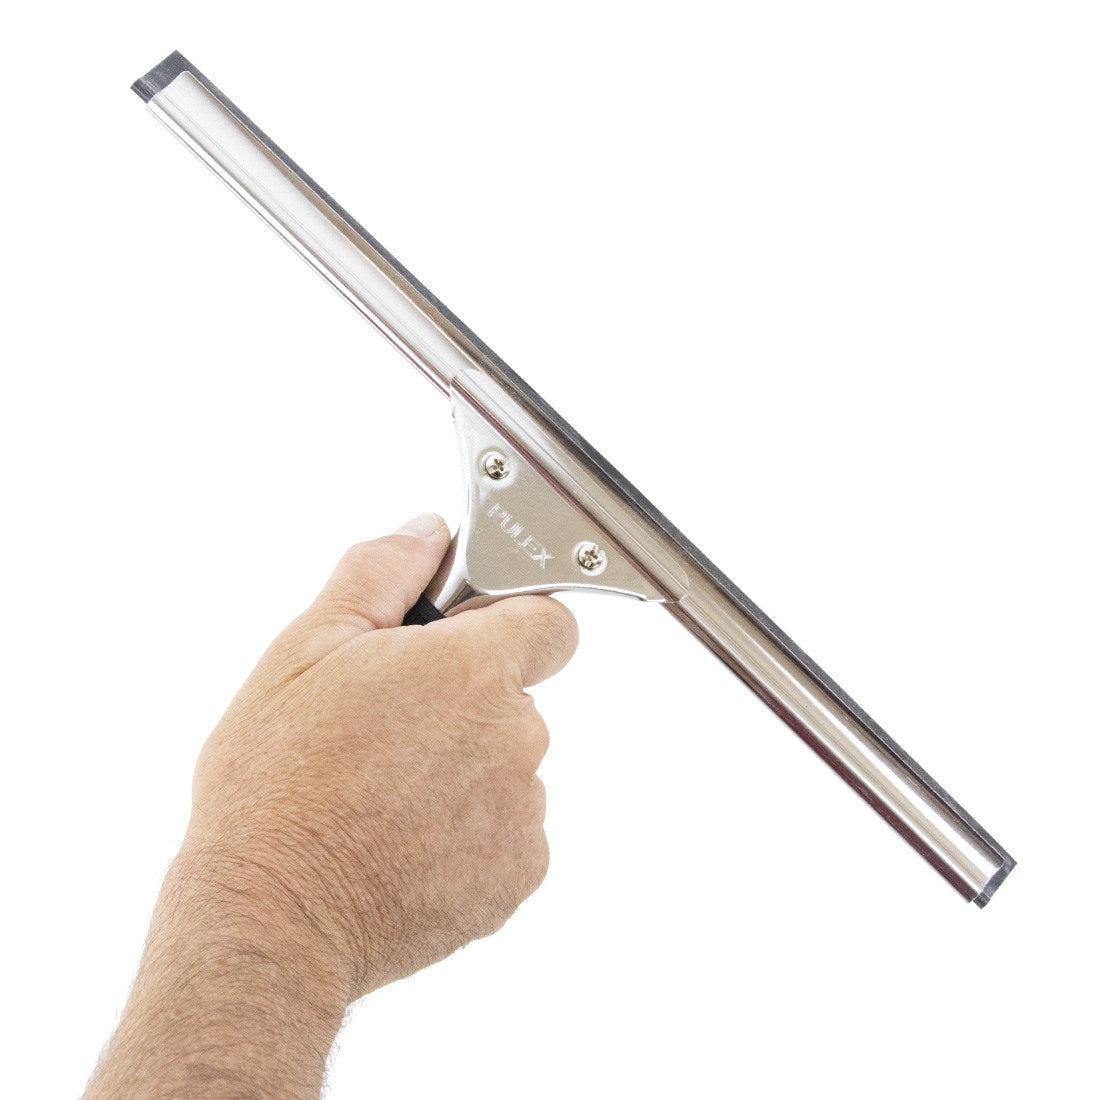 Pulex Complete Stainless Steel with Rubber Grip Squeegee In Hand View